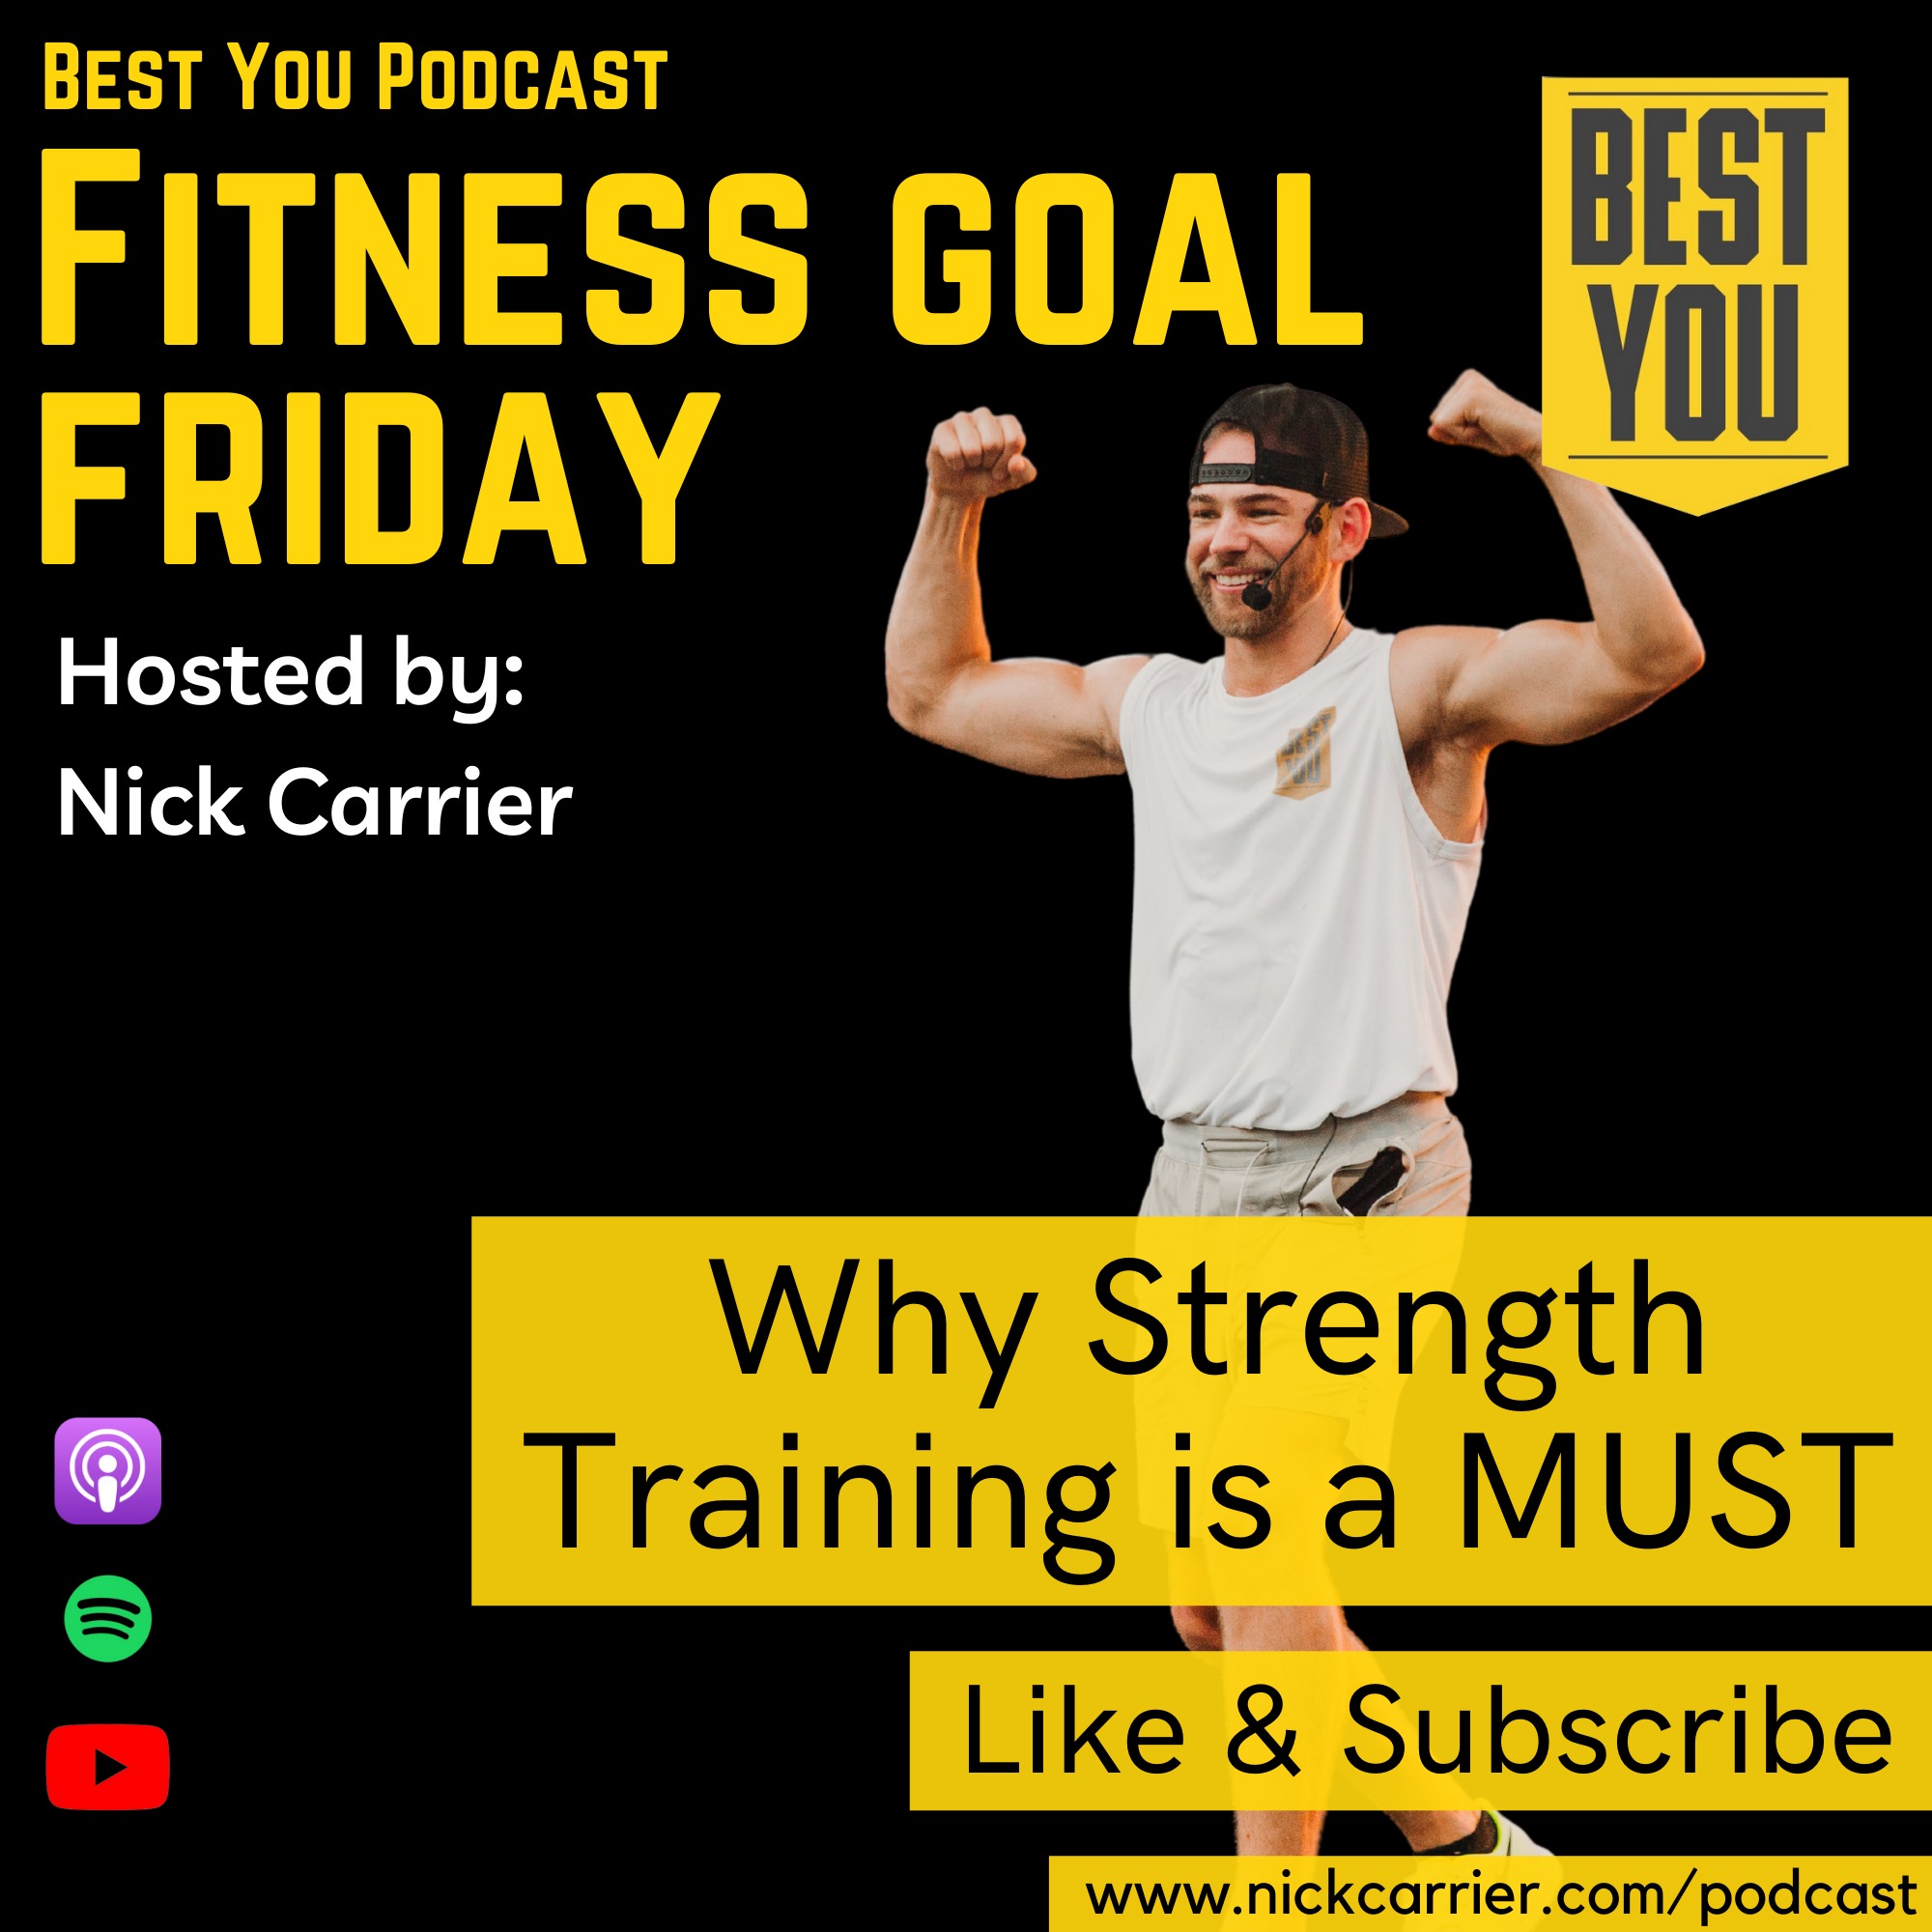 Fitness Goal Friday - Why Strength Training is a MUST